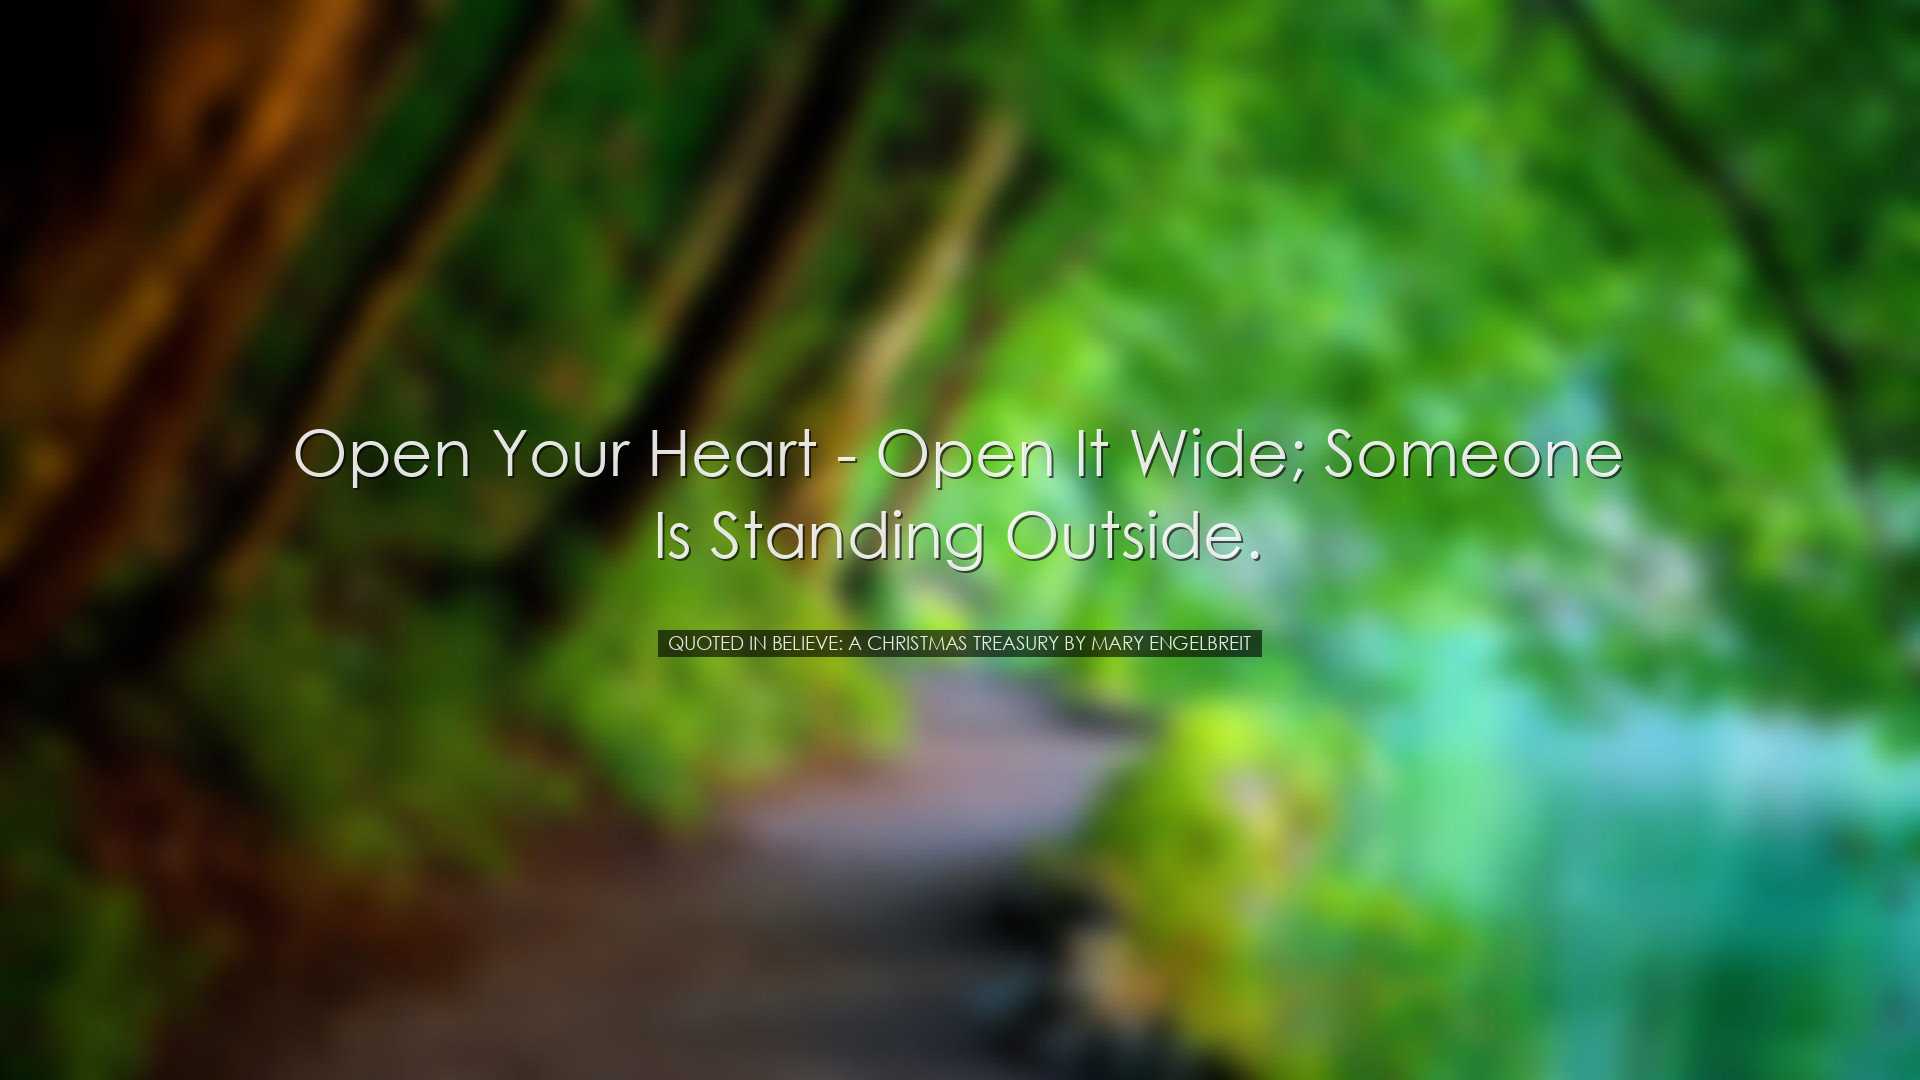 Open your heart - open it wide; someone is standing outside. - Quo